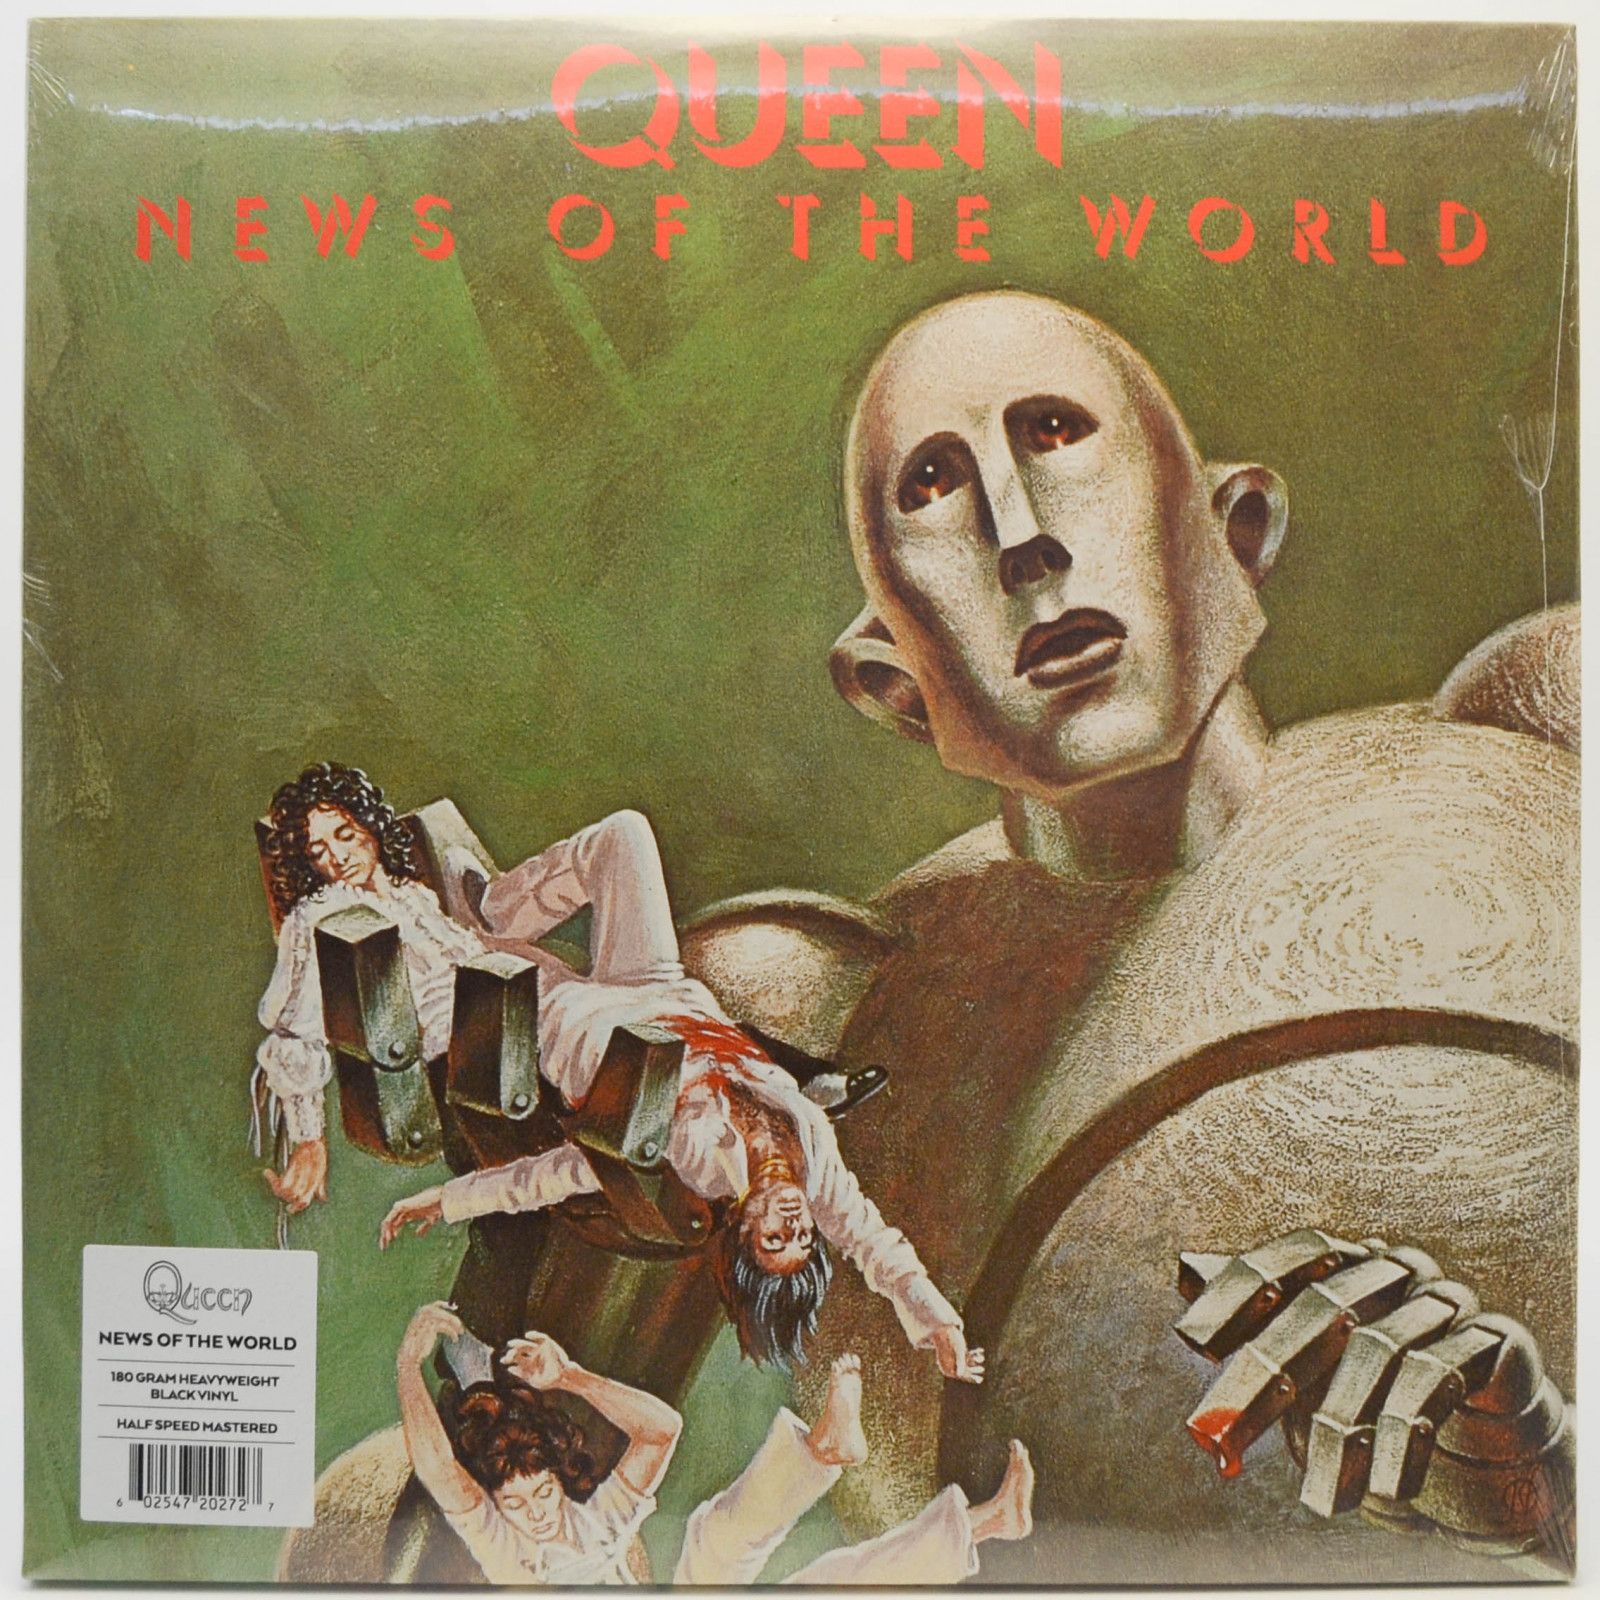 Queen — News Of The World, 1977